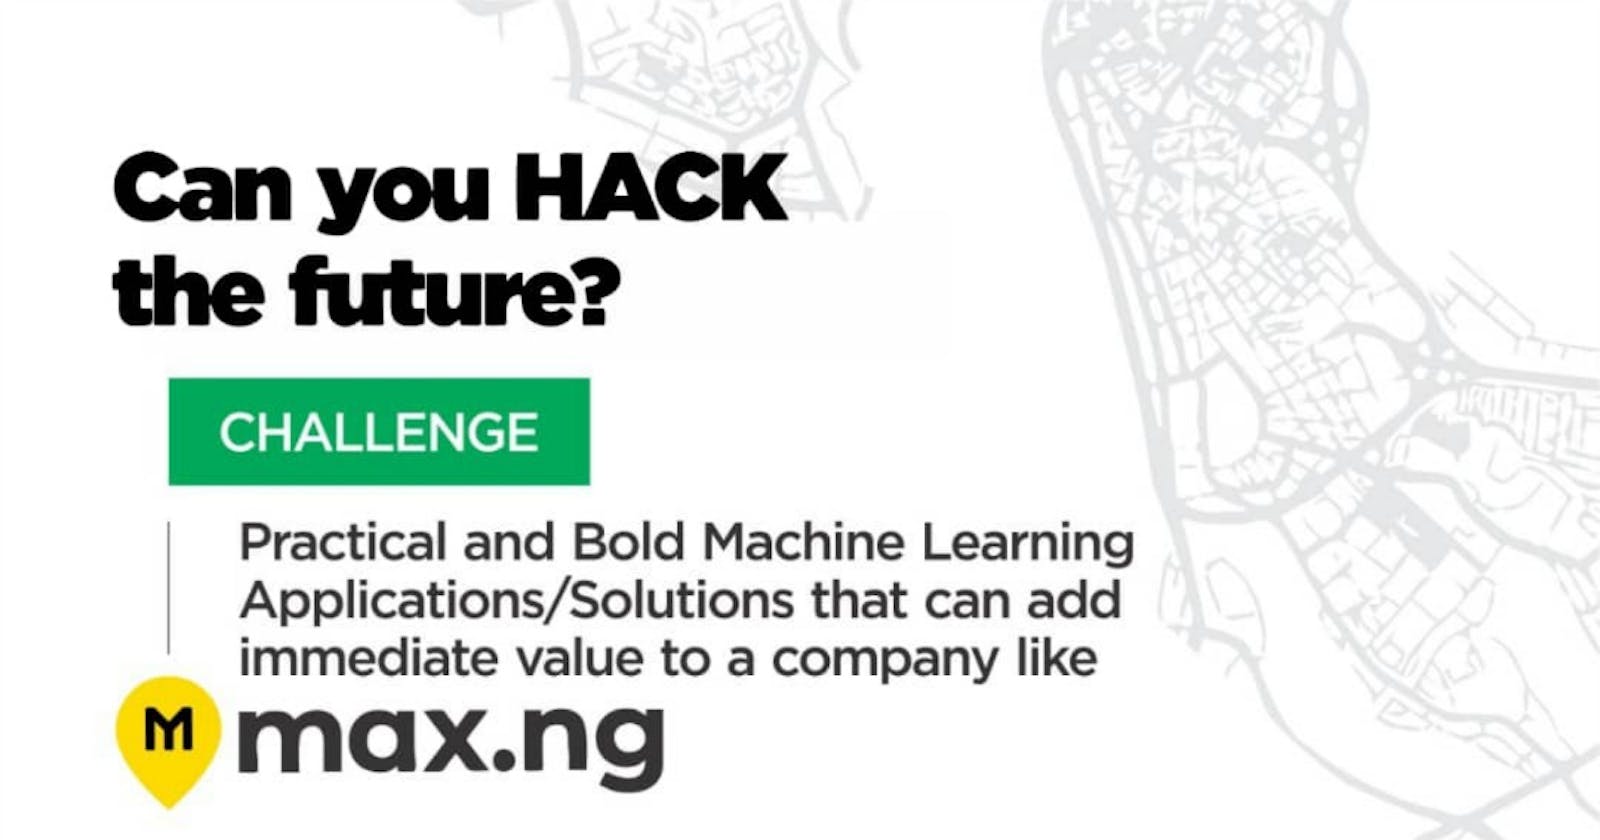 'Can You HACK The Future' Ideathon: How We Made It to the Finals and Lost.